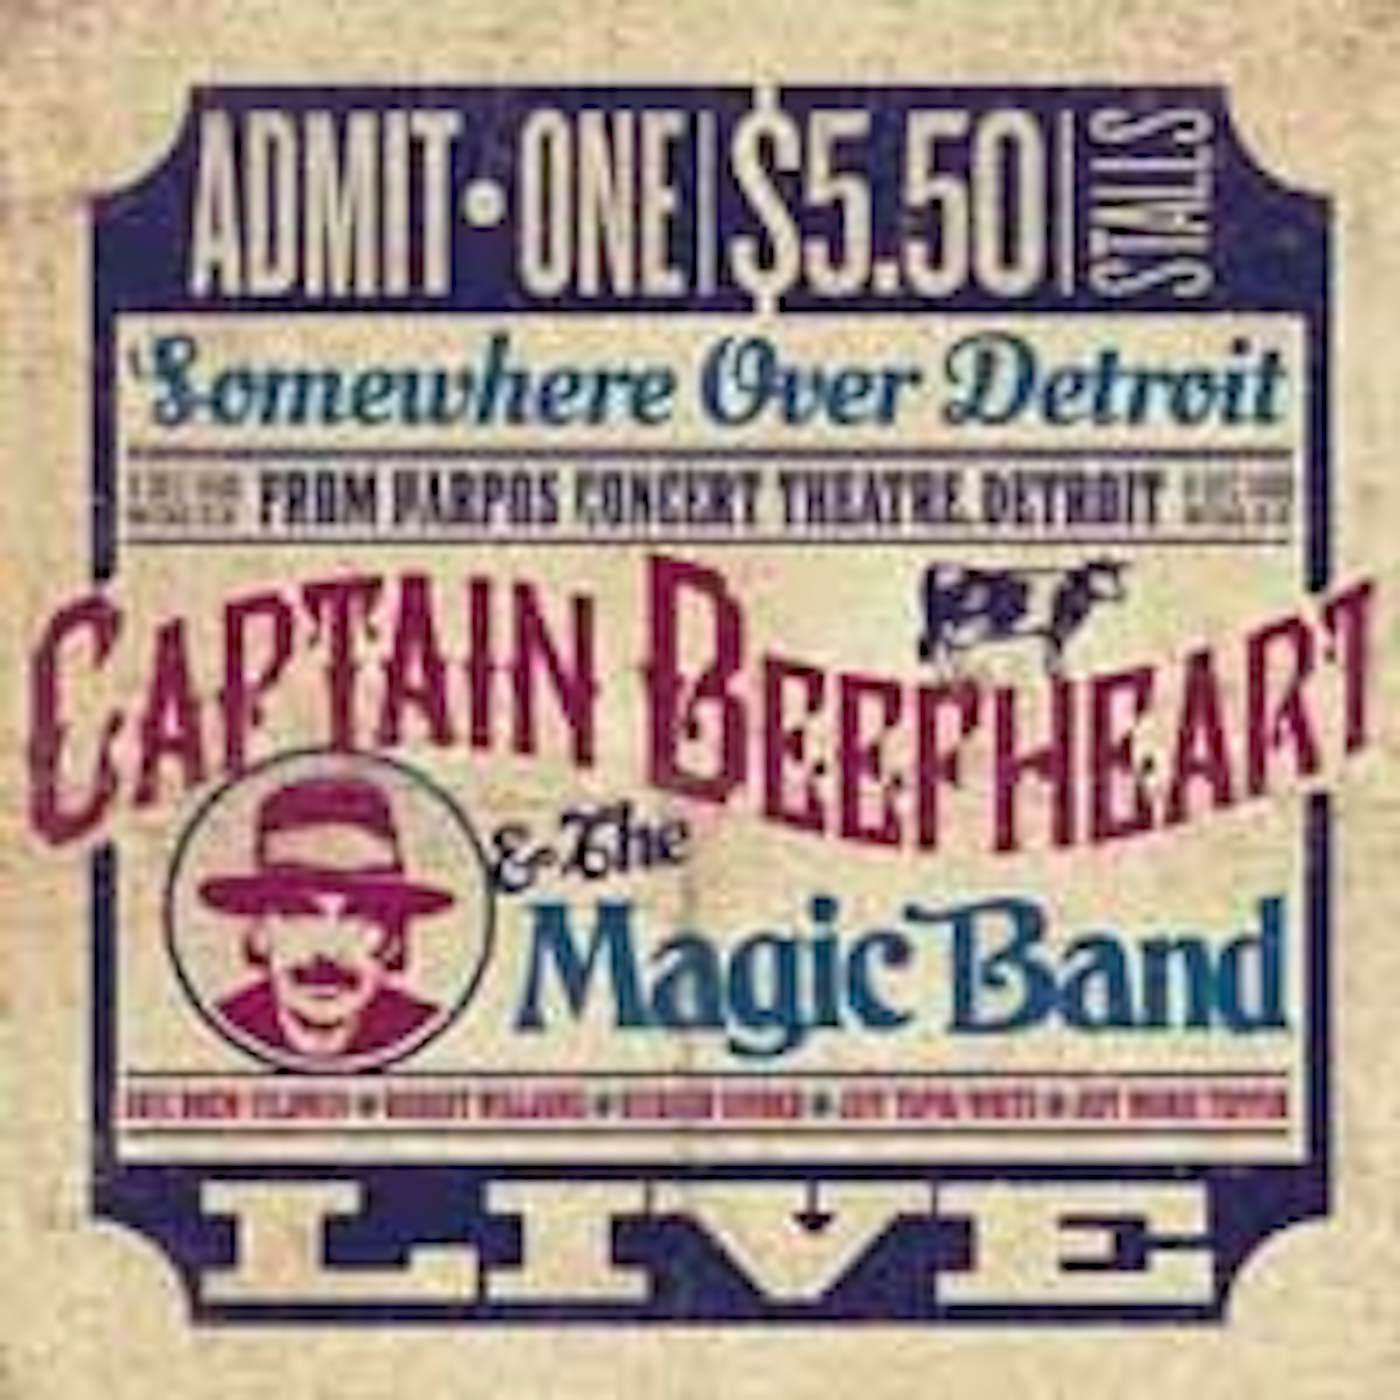 Captain Beefheart & His Magic Band SOMEWHERE OVER DETROIT: LIVE FROM HARPO'S Vinyl Record